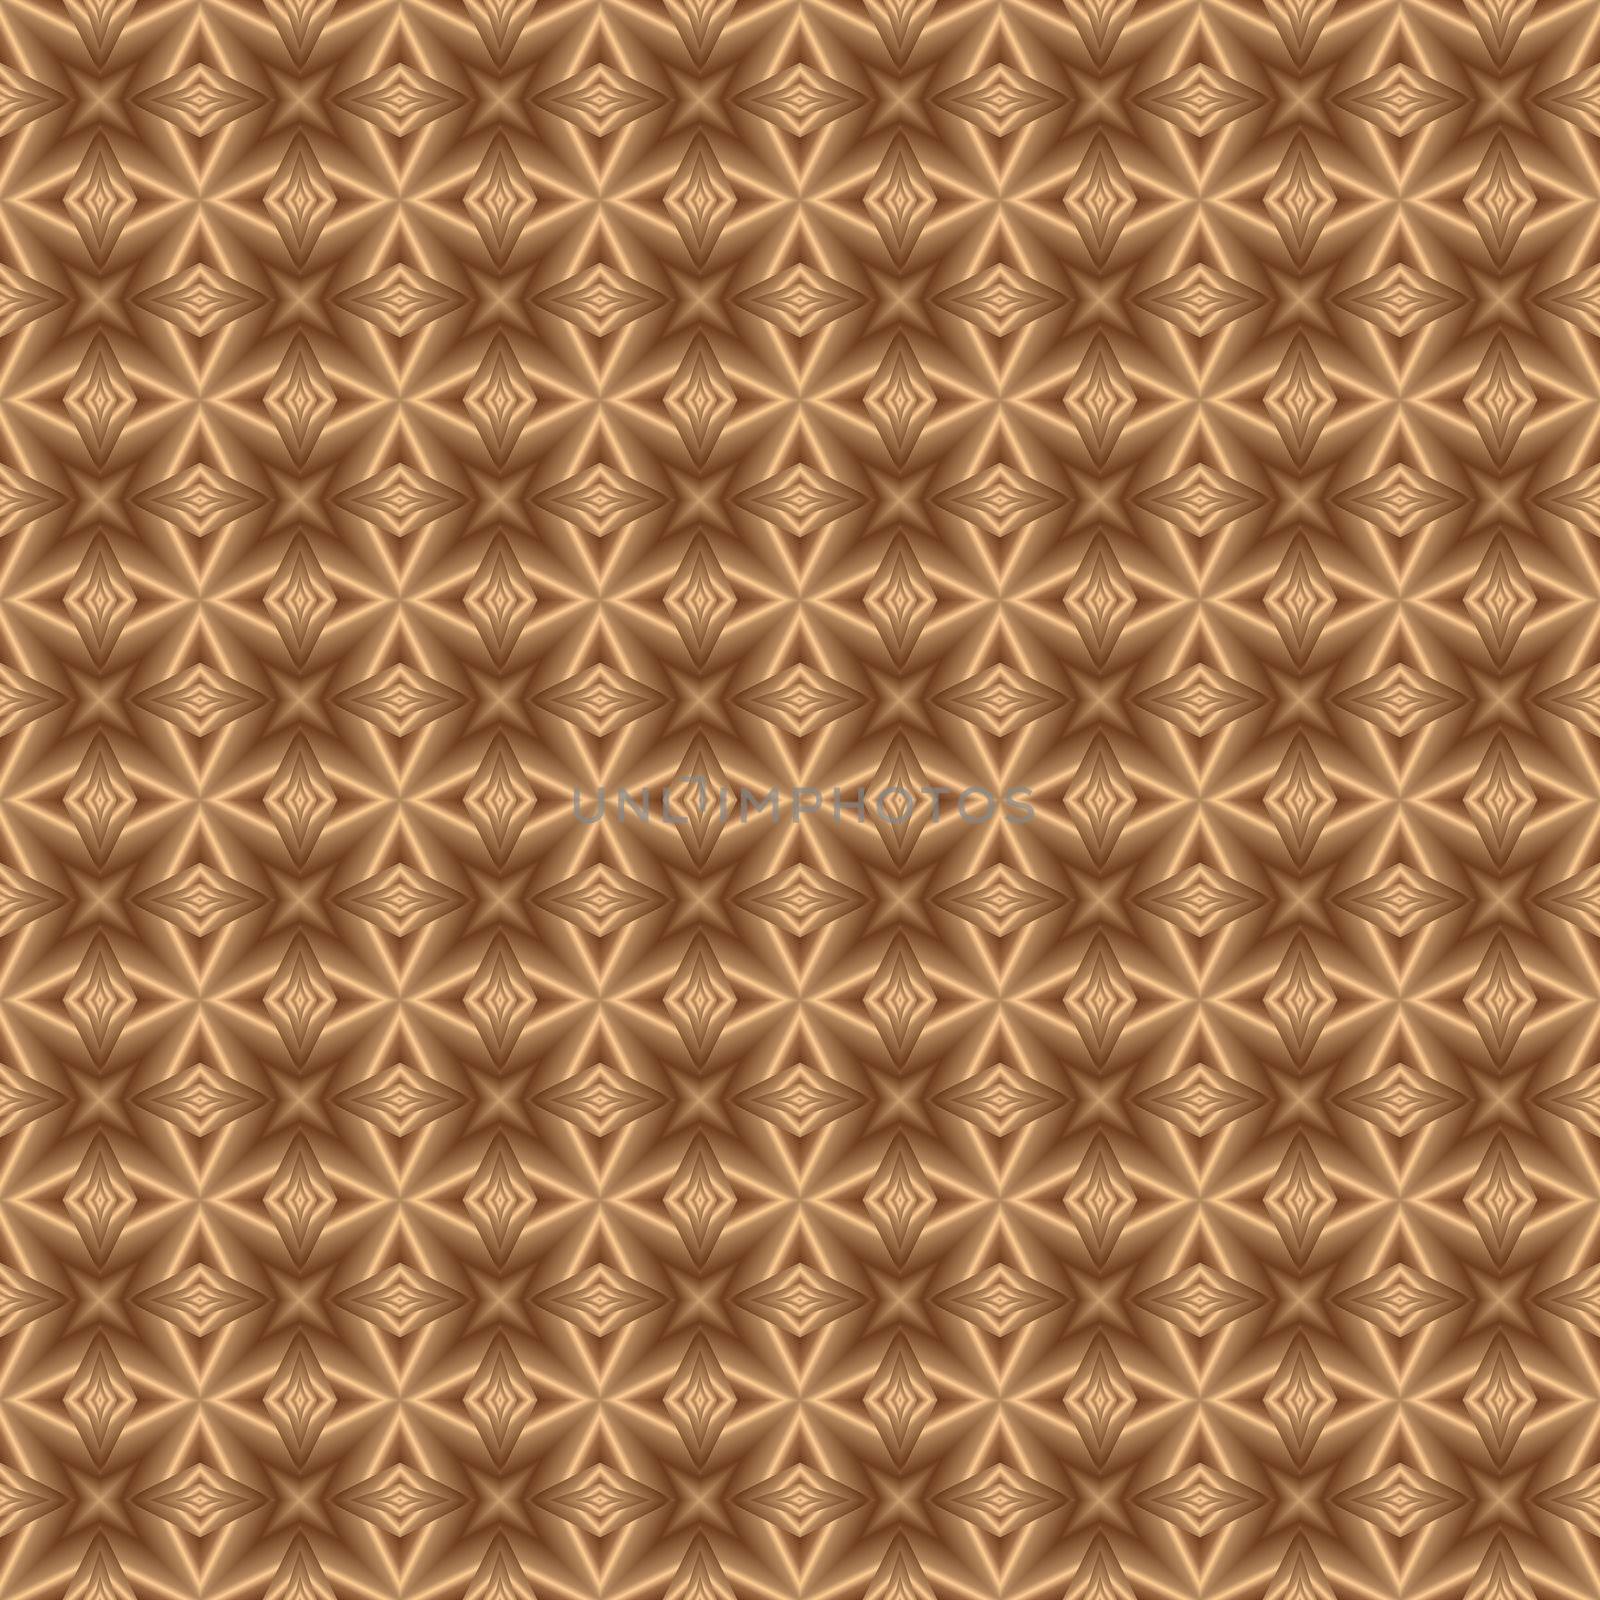 seamless tilable background copper texture with old-fashioned look